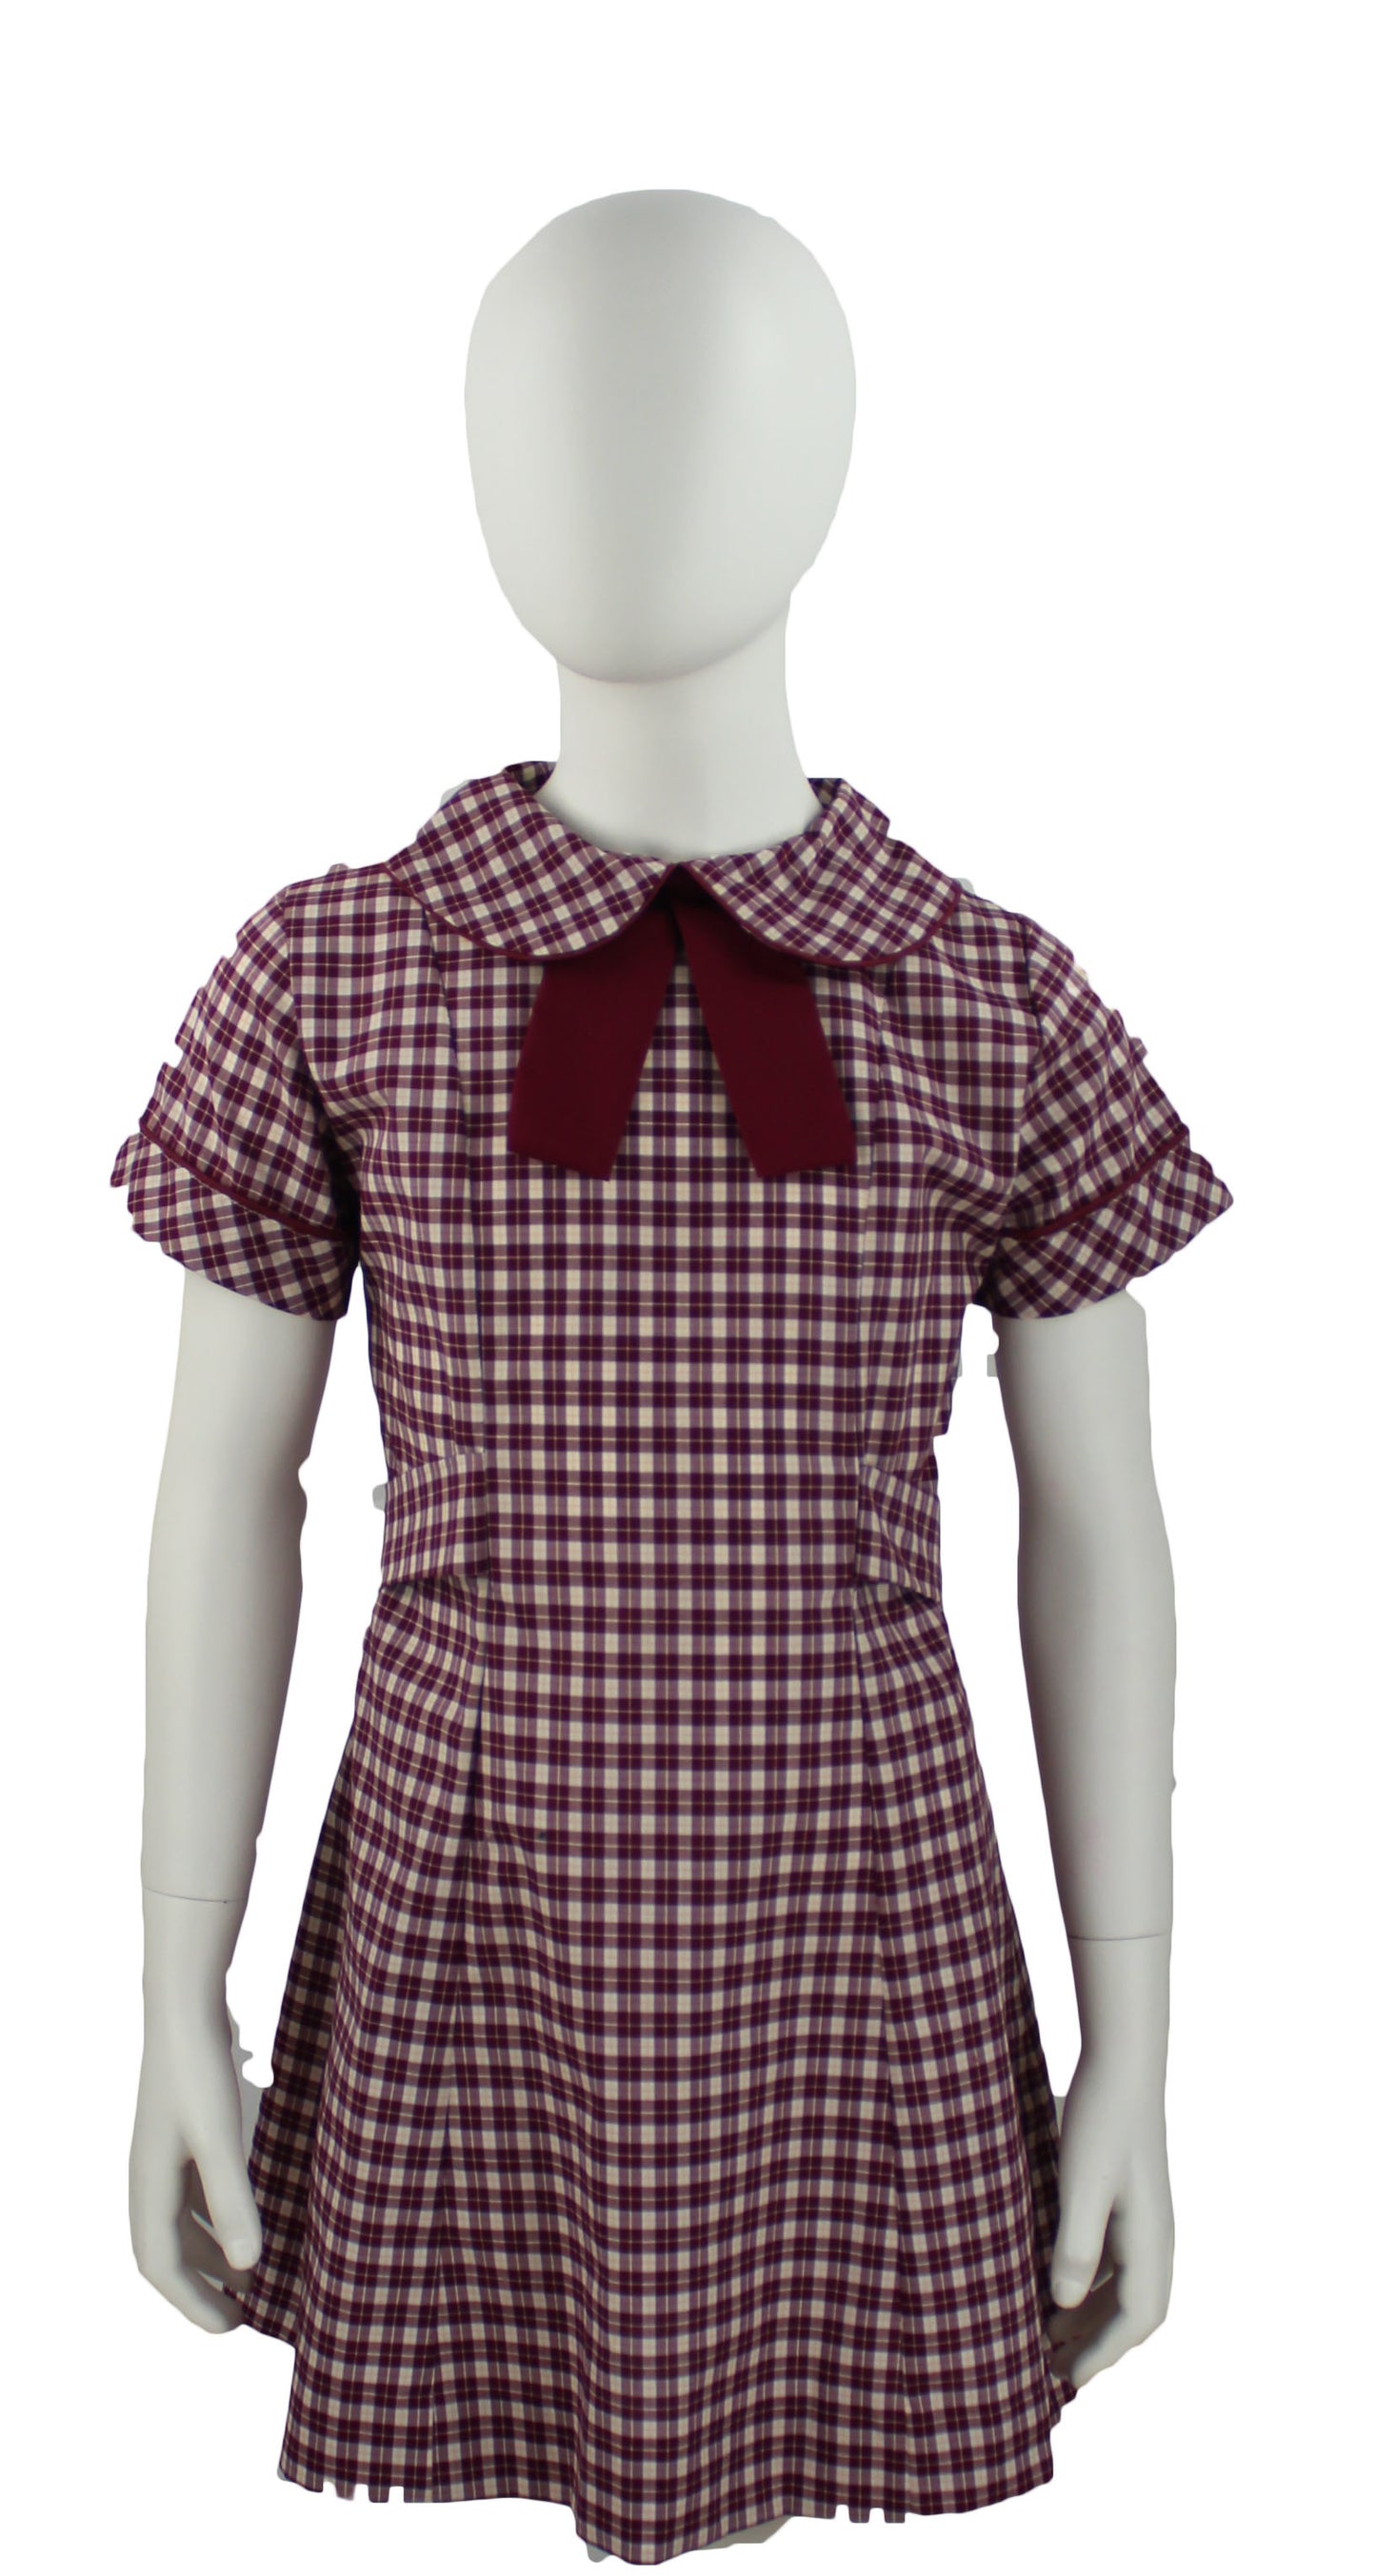 SEAHOLME PRIMARY SUMMER DRESS